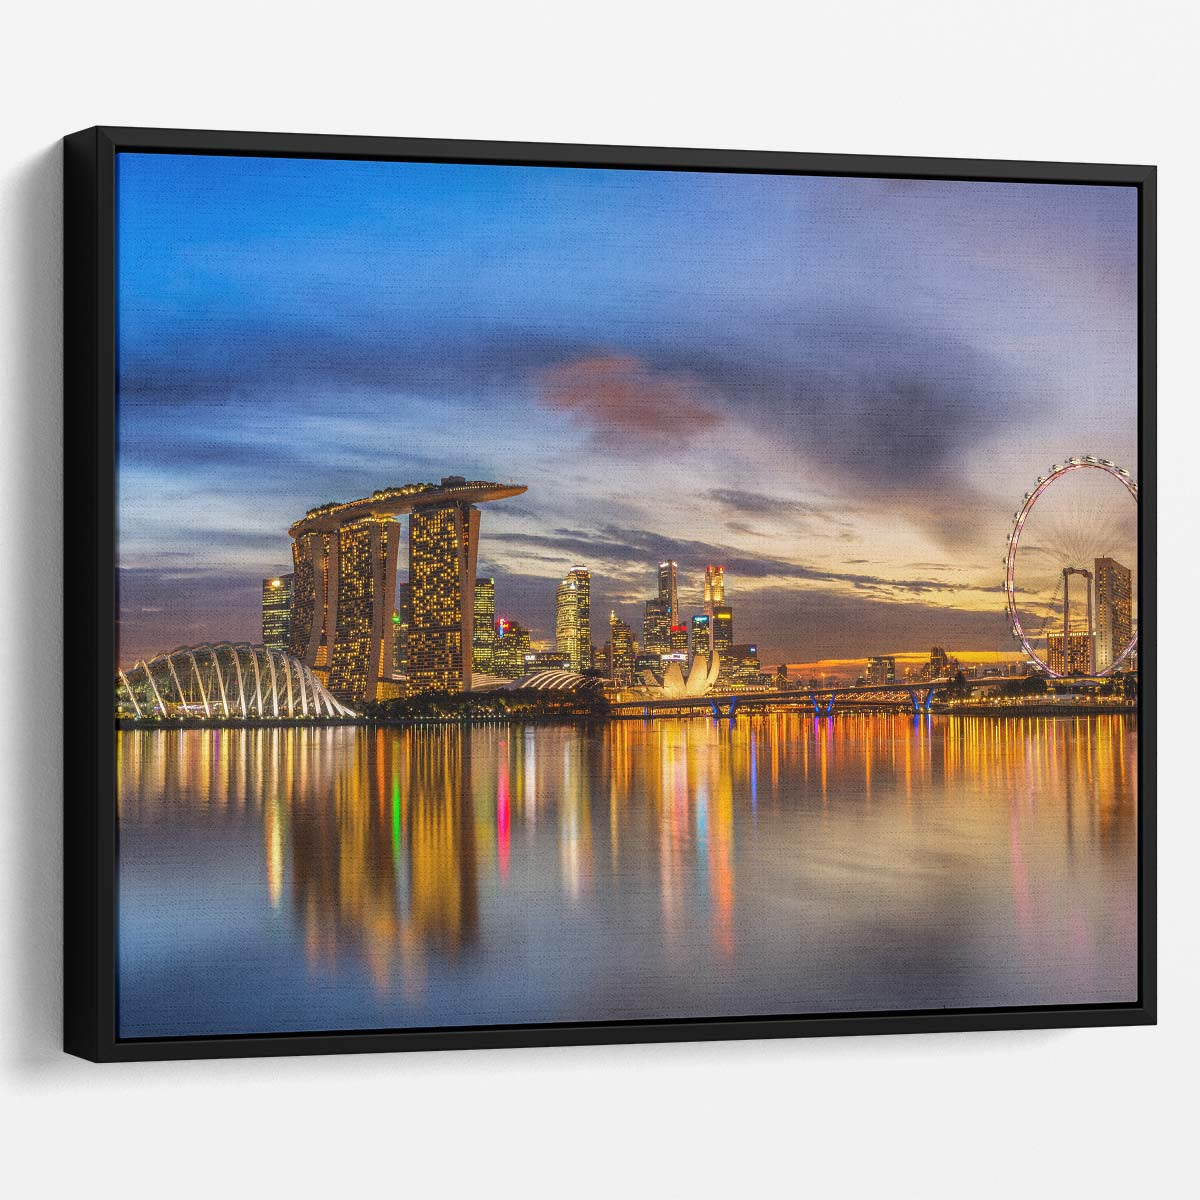 Golden Glow Singapore Skyline Sunset Panorama Wall Art by Luxuriance Designs. Made in USA.